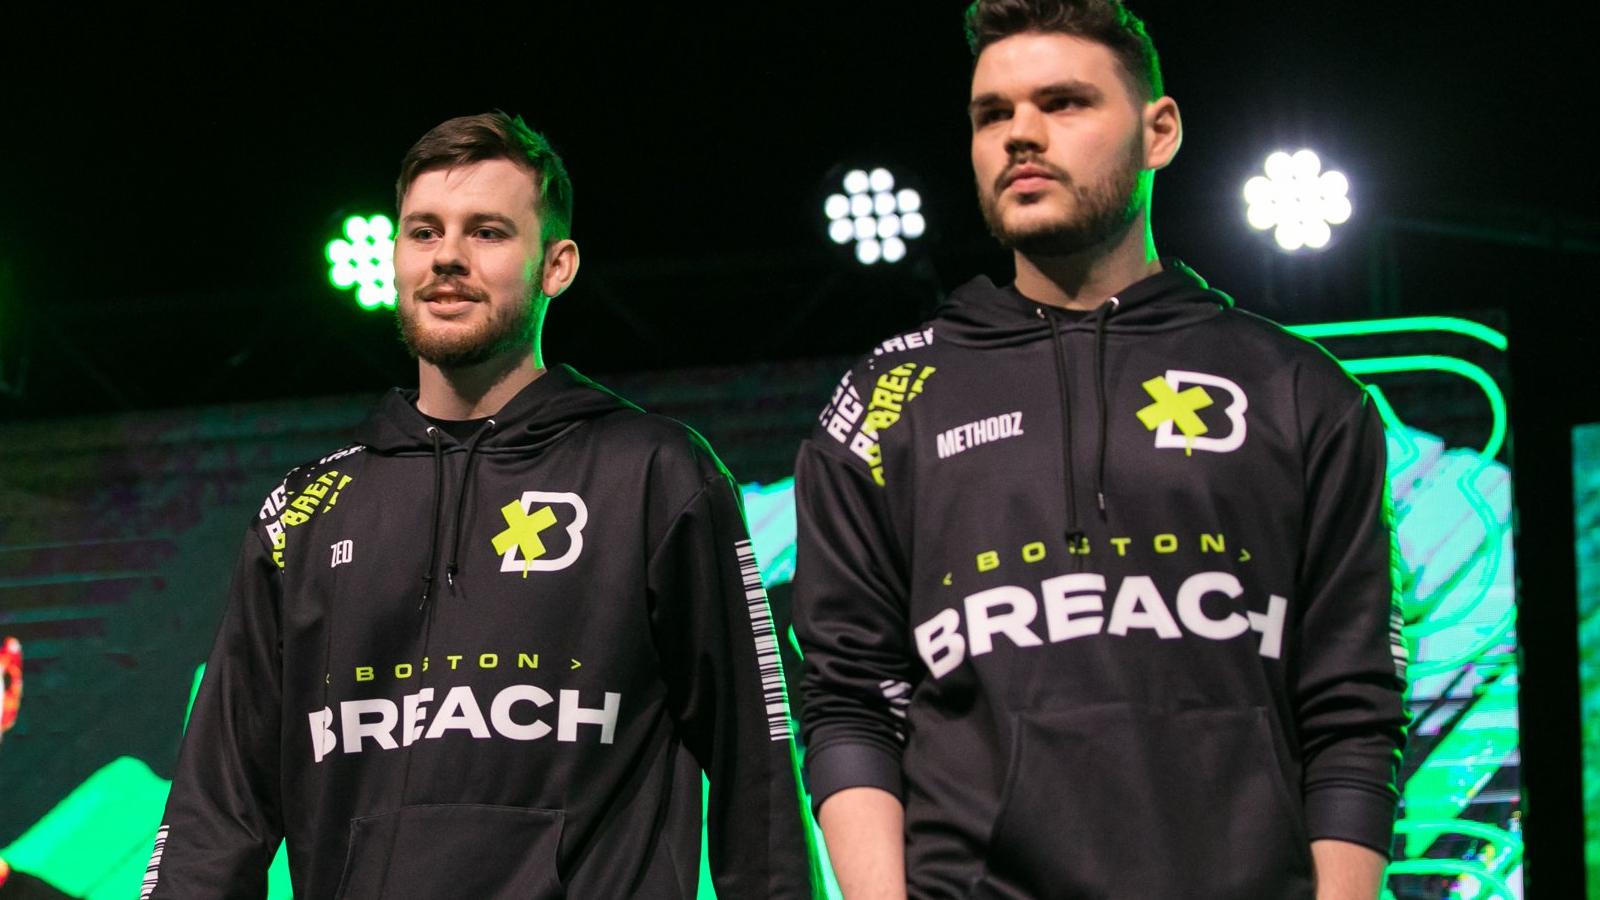 Methodz and Vivid of the Boston Breach's 2022 CDL roster